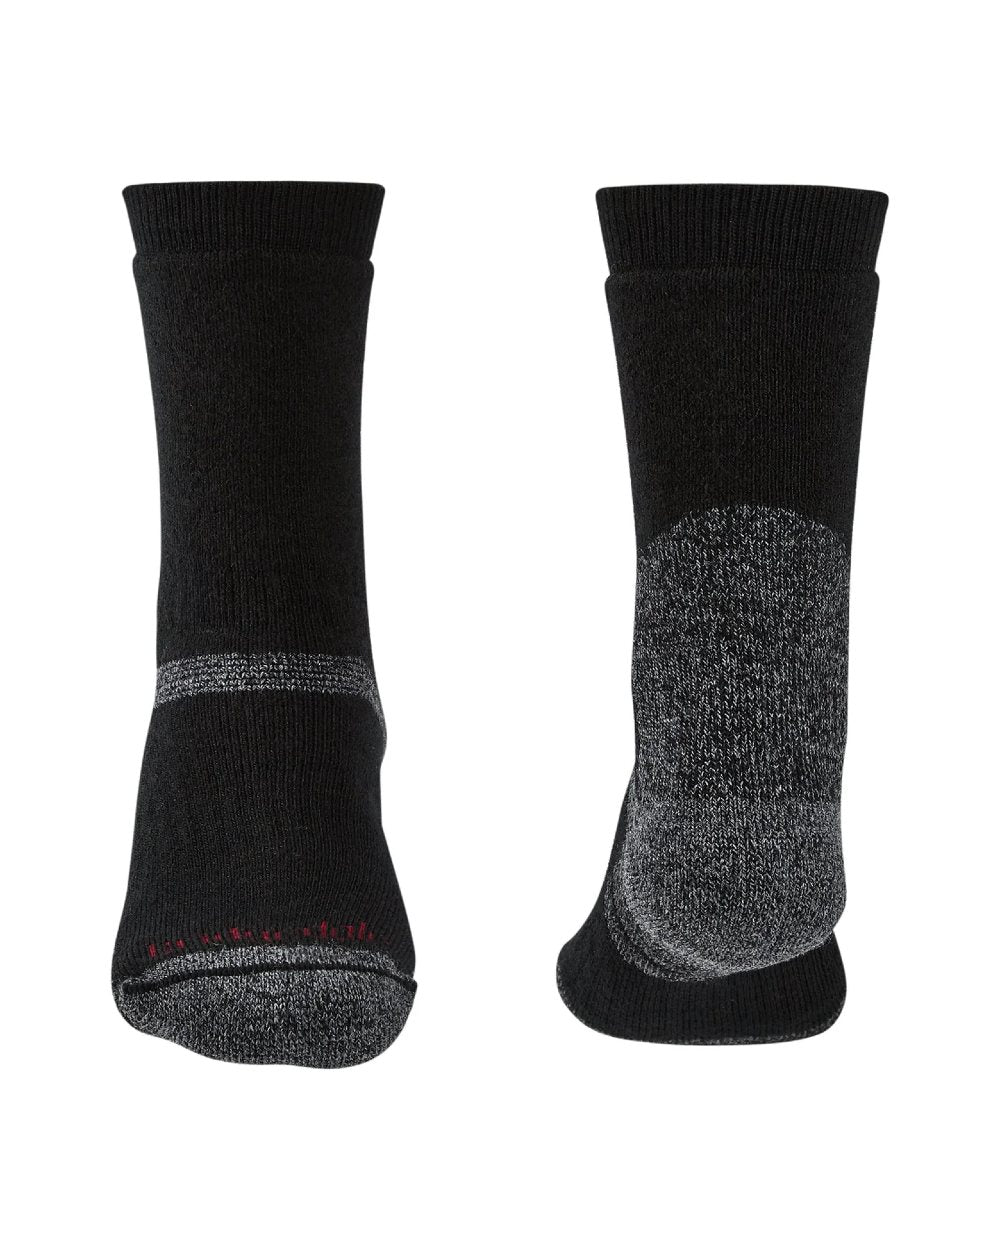 Front and back of Black coloured Bridgedale Heavyweight Merino Performance Socks on a white background 